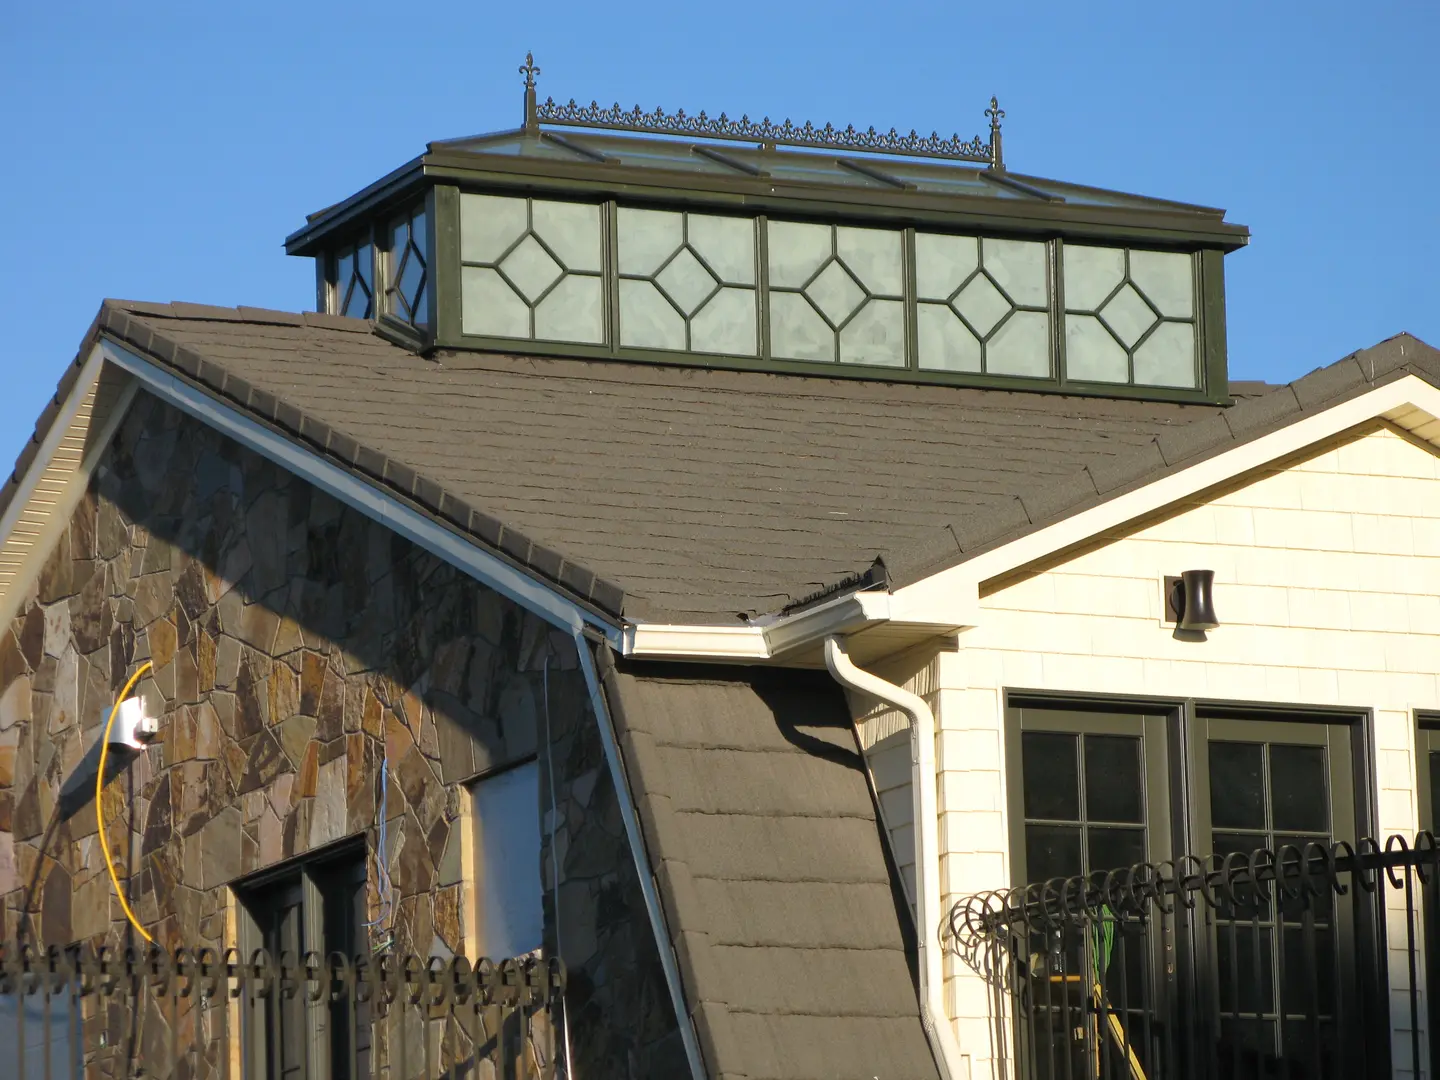 A building with a roof that has a decorative design on it.